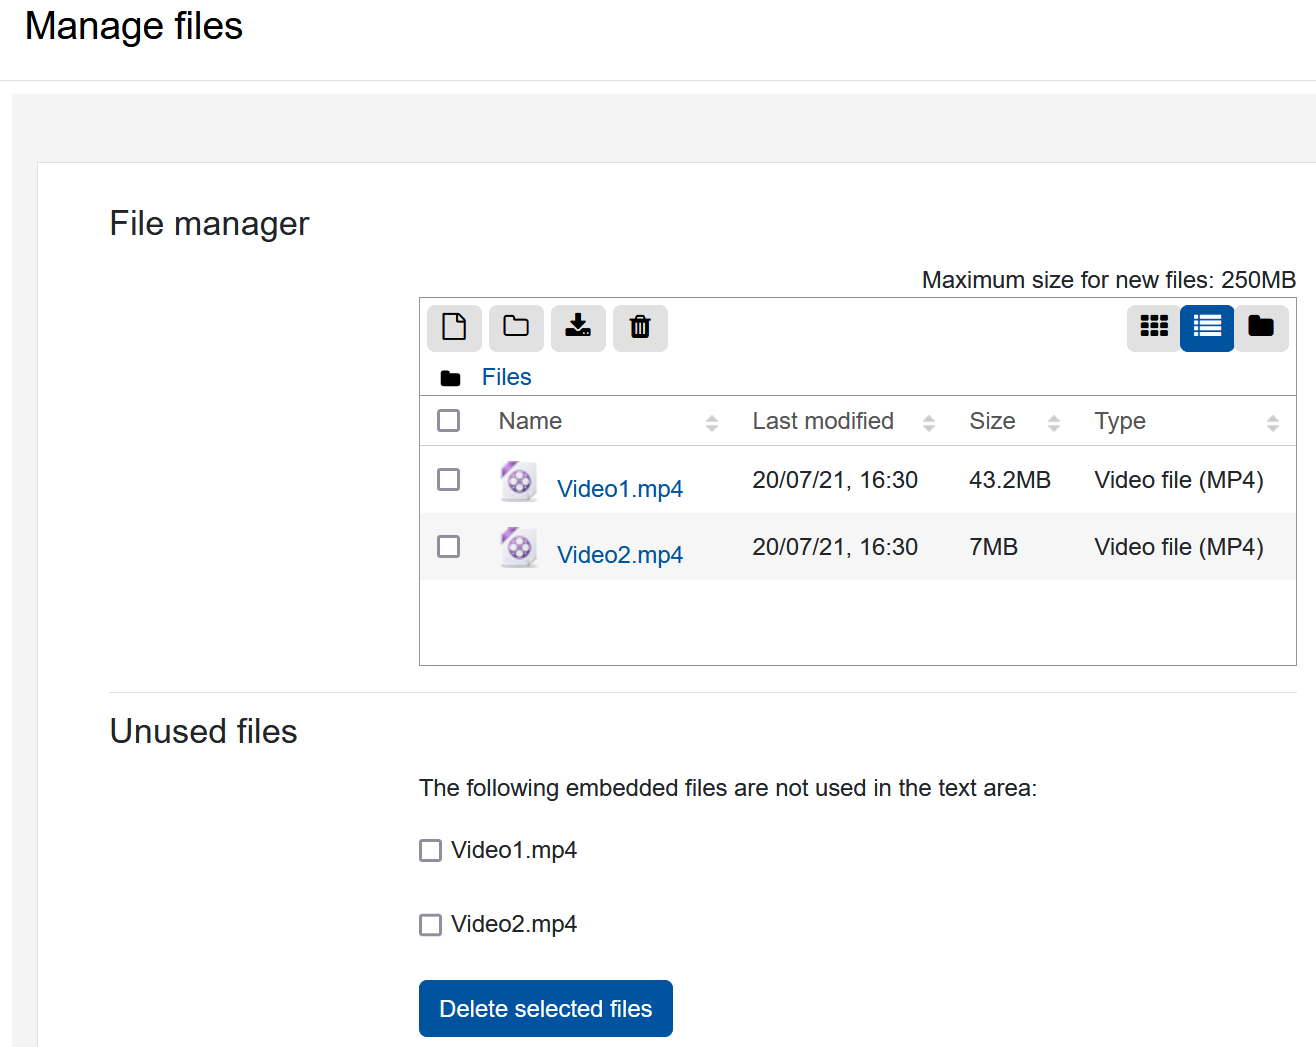 Screenshot "Manage files" with display of files uploaded to the repository